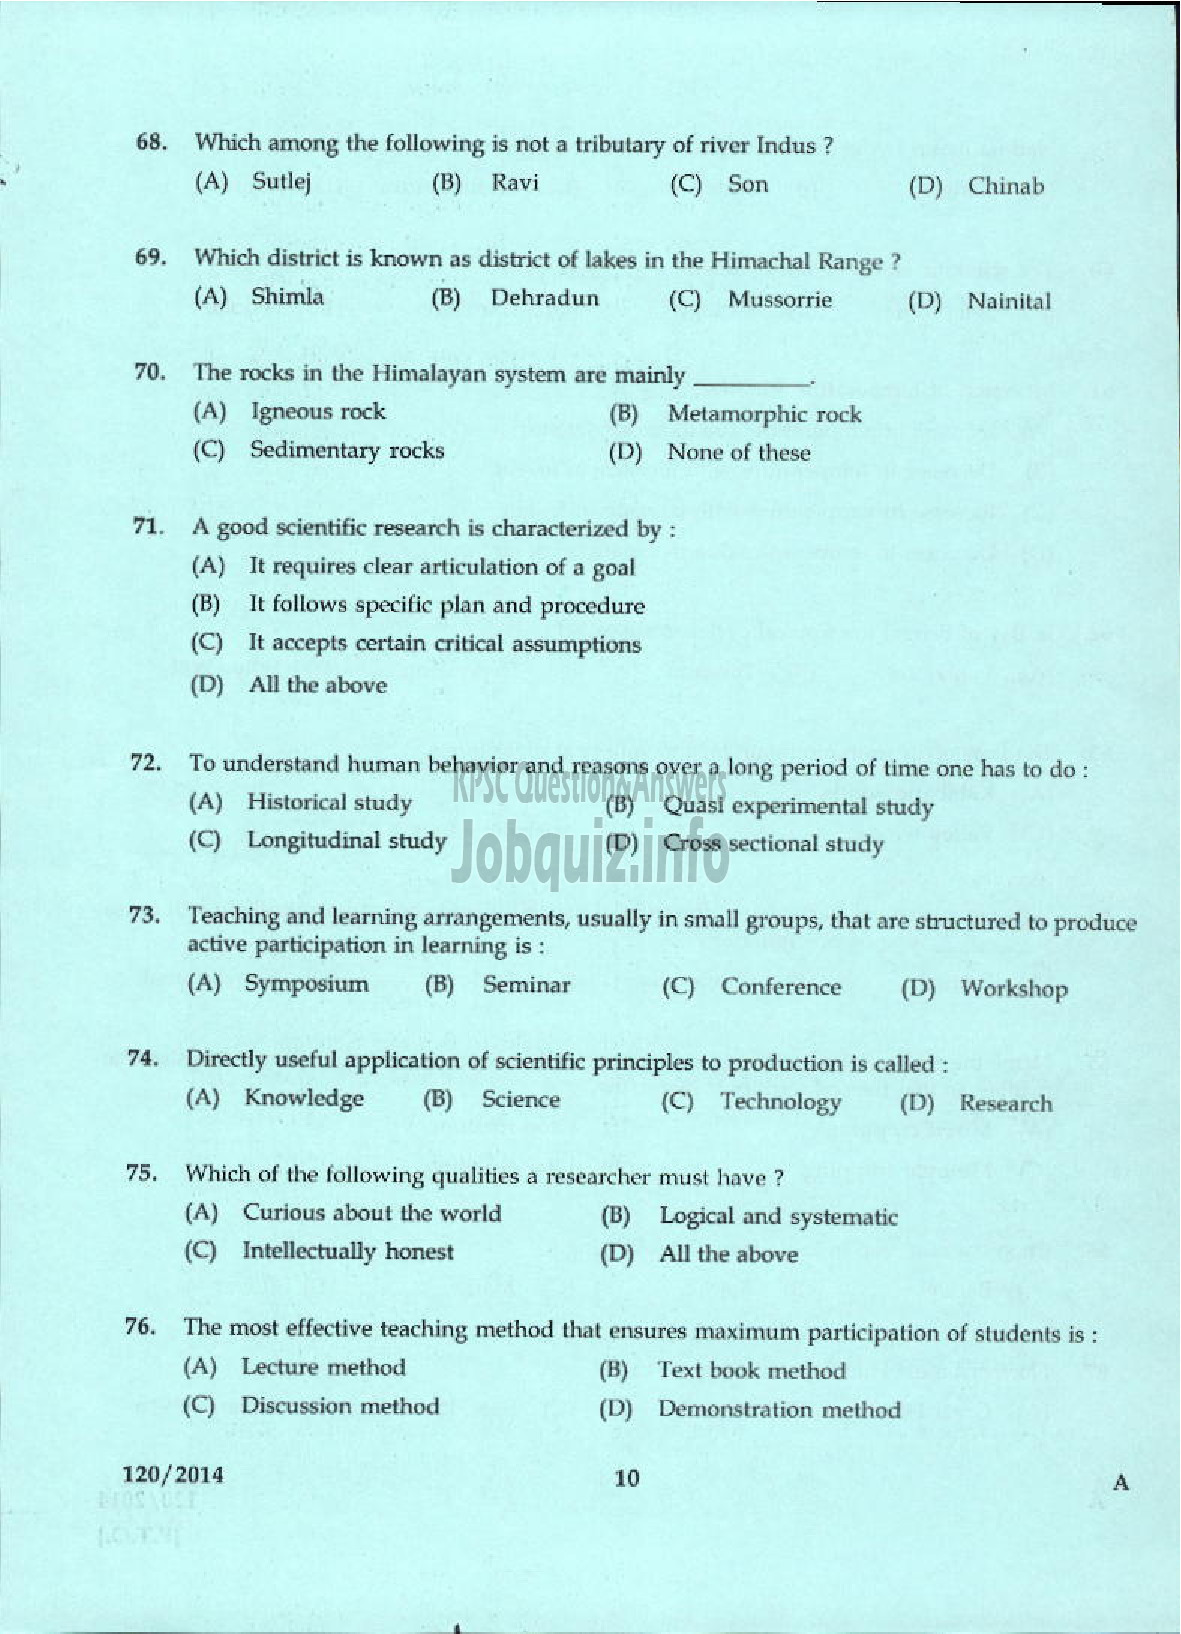 Kerala PSC Question Paper - LECTURER IN GEOGRAPHY KERALA COLLEGIATE EDUCATION-8